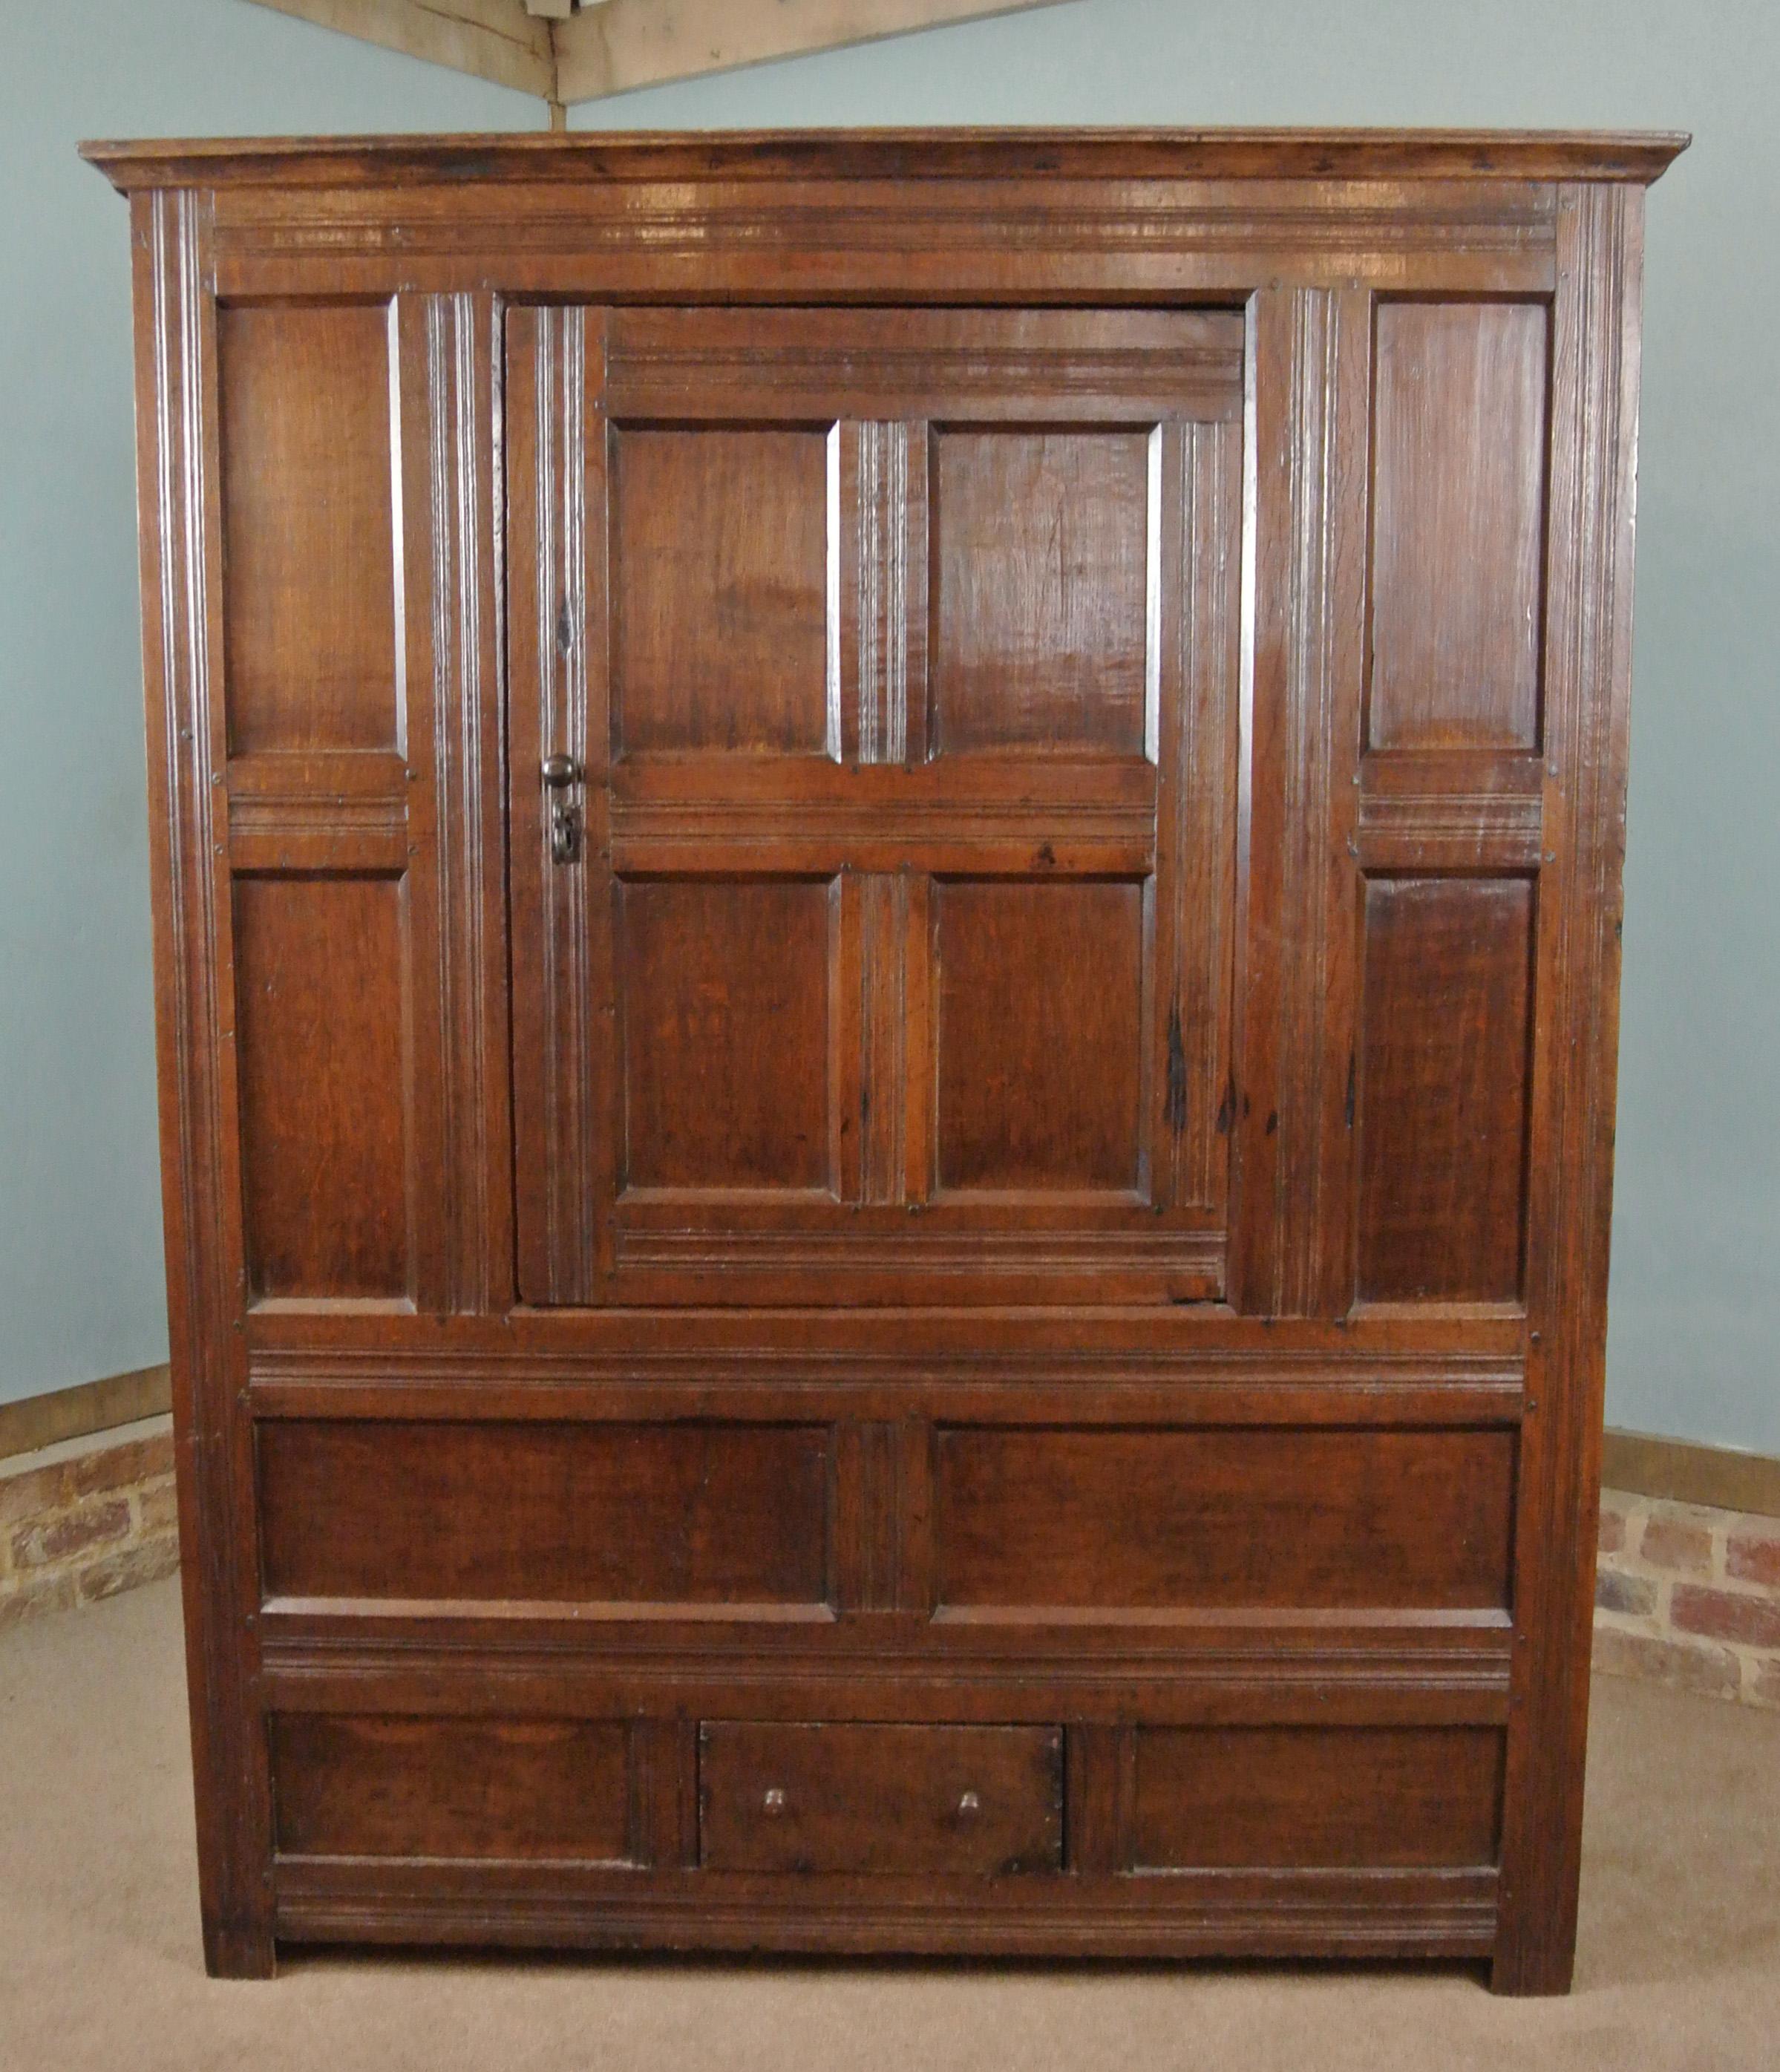 Small And Charming 17th Century Original Press Cupboard C. 1670 In Good Condition For Sale In Heathfield, GB